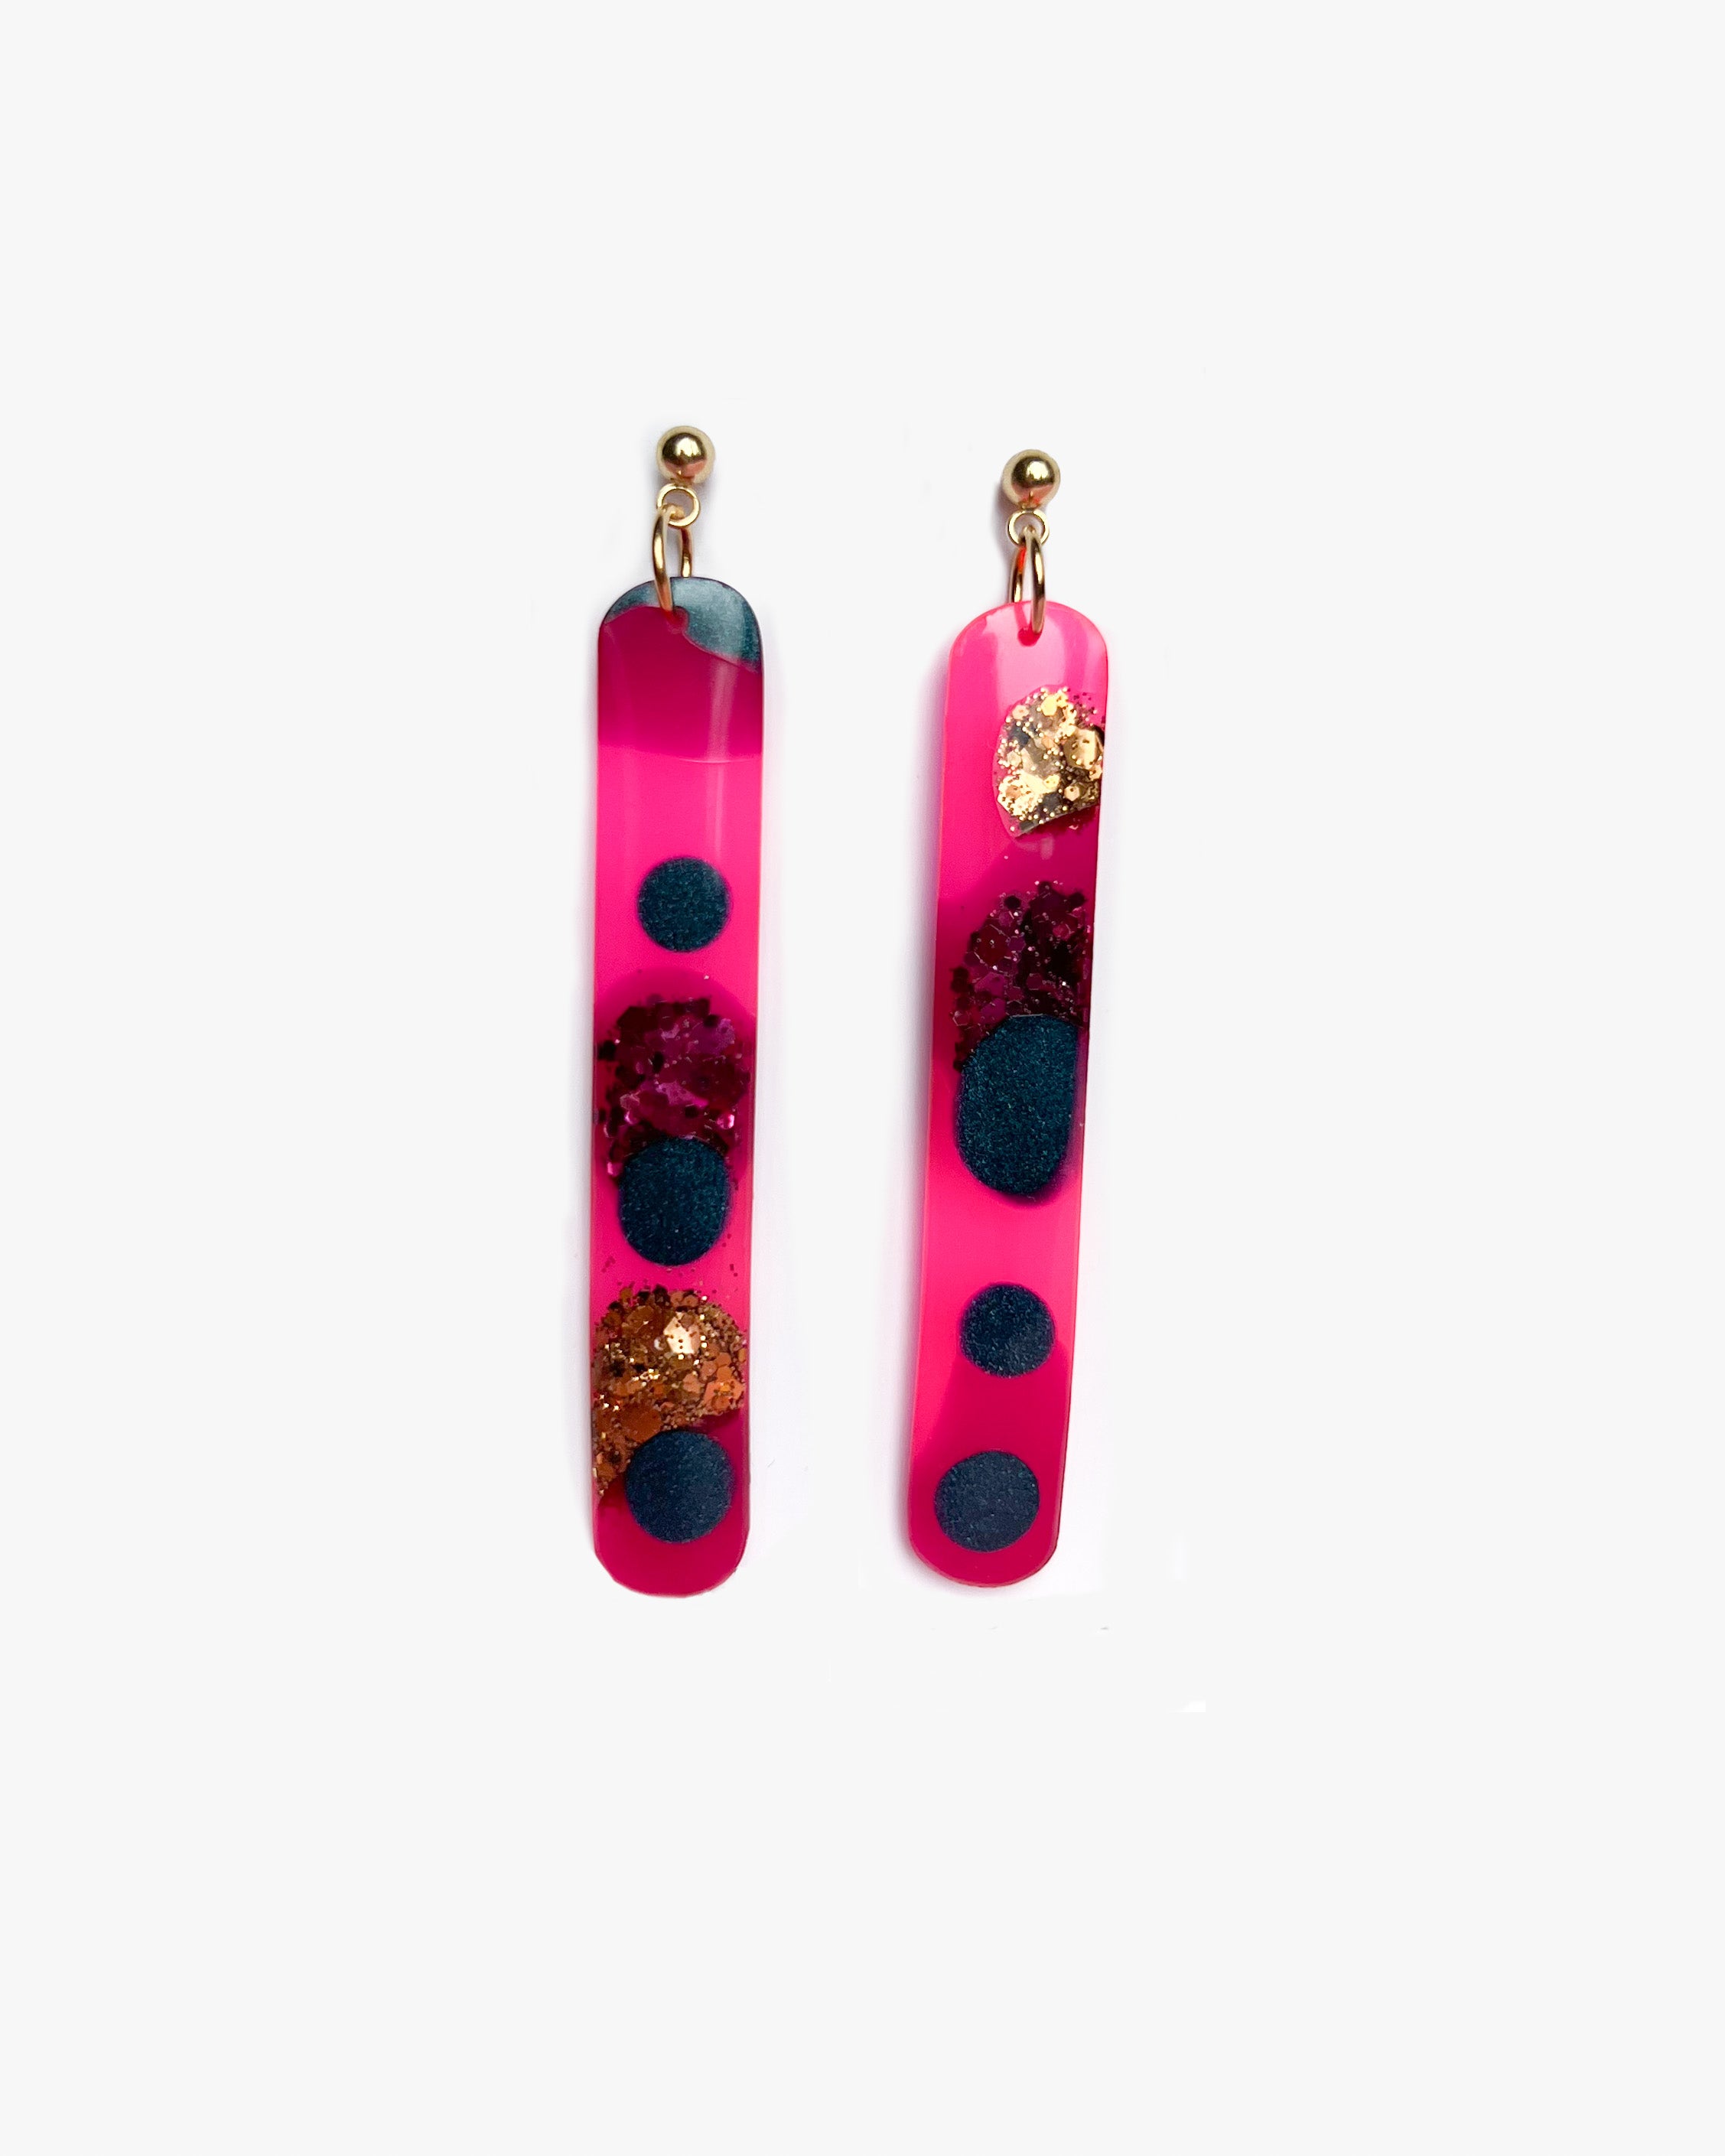 Neon pink bar earrings, Bright statement earrings with colourful glitter, Handmade jewelry gift